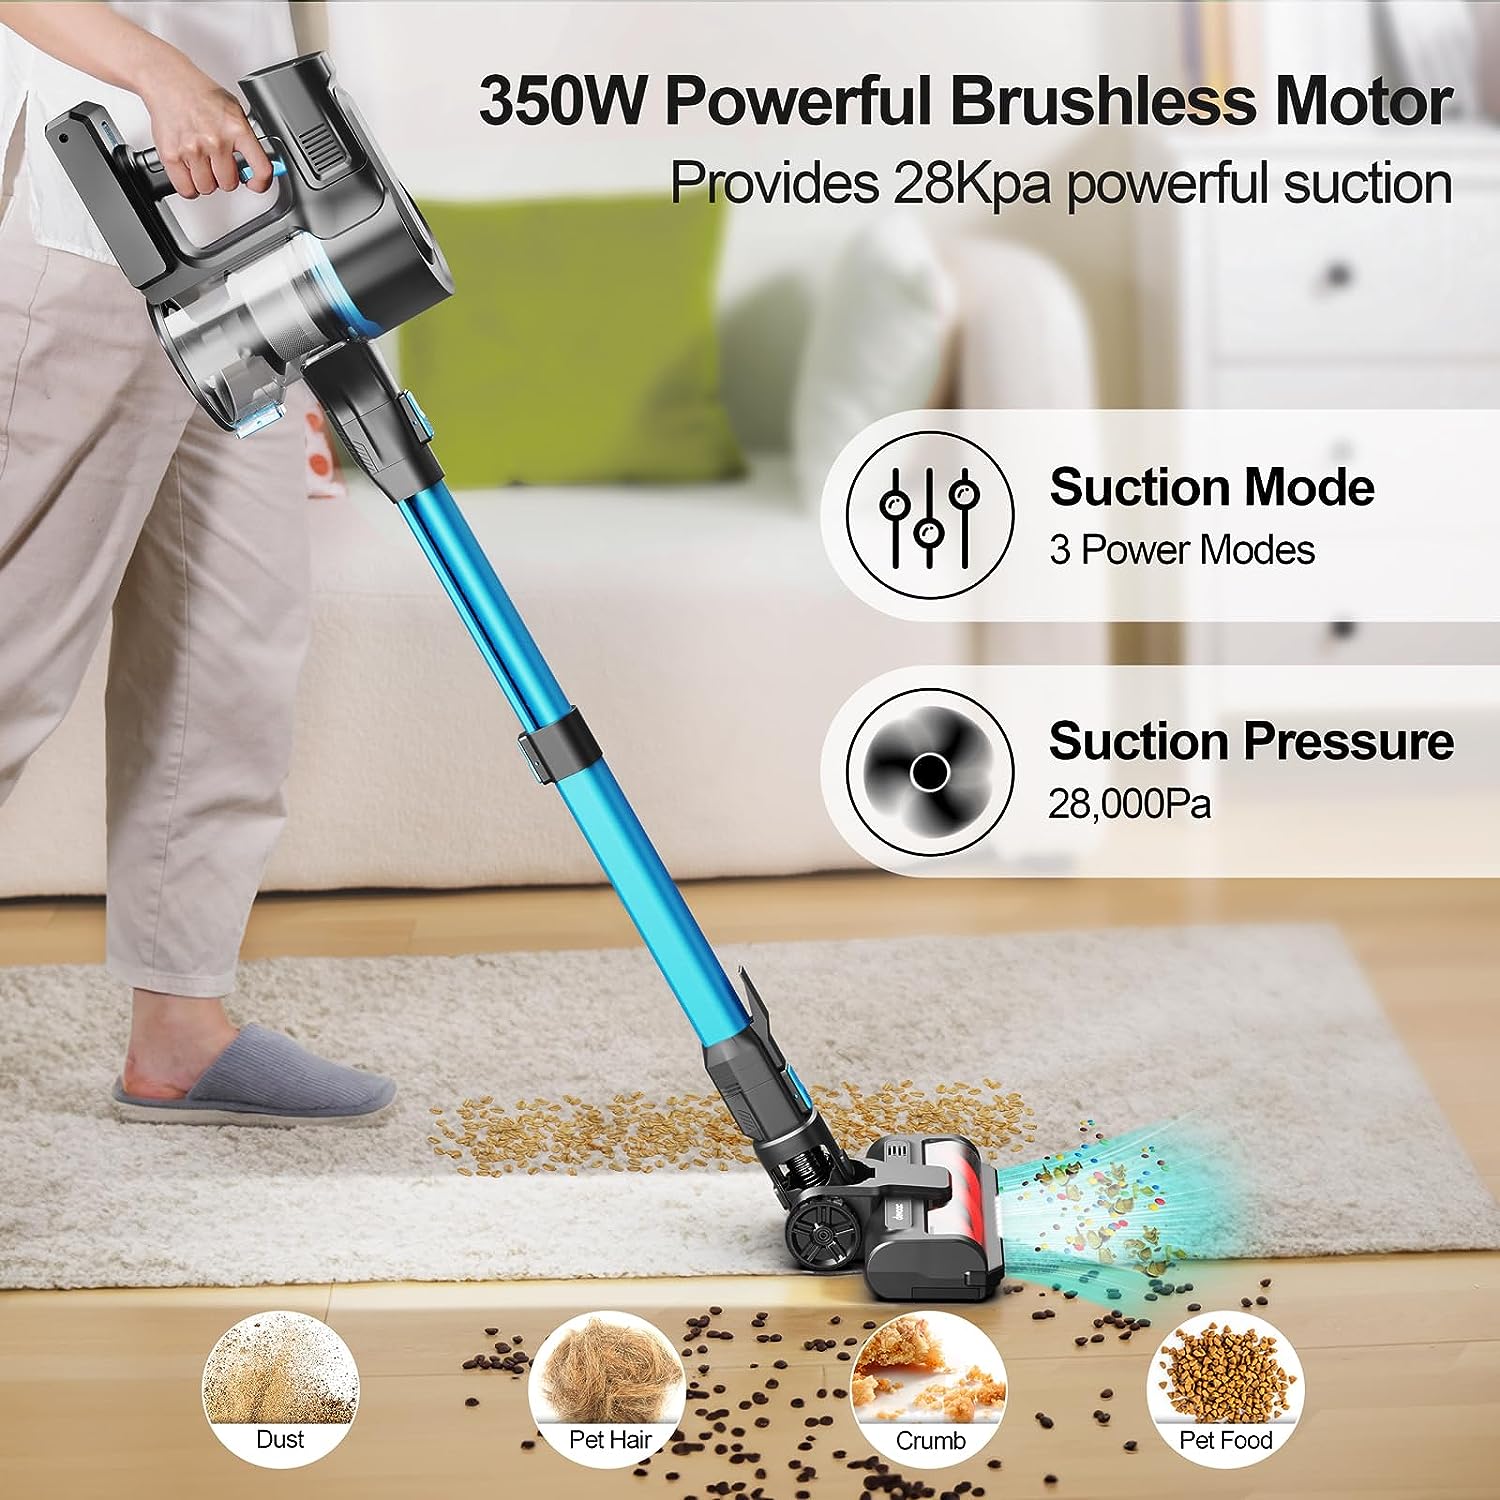 Rechargeable Cordless Handheld Vacuum Cleaner - 2 Speed, Powerful